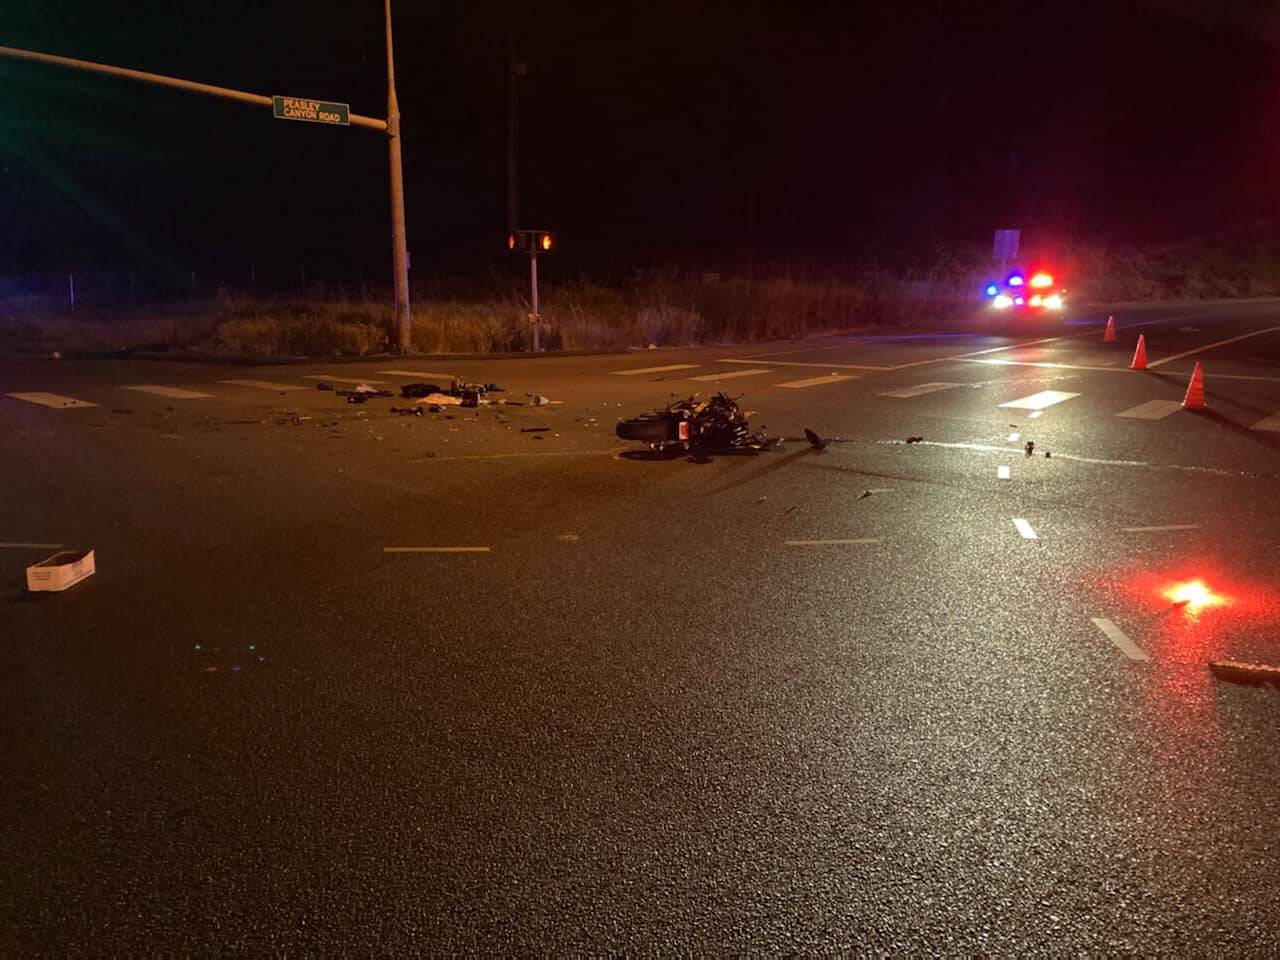 The aftermath of the fatal hit-and-run that killed a motorcyclist on Thursday, Sept. 15. Photo courtesy of Auburn Police Department.